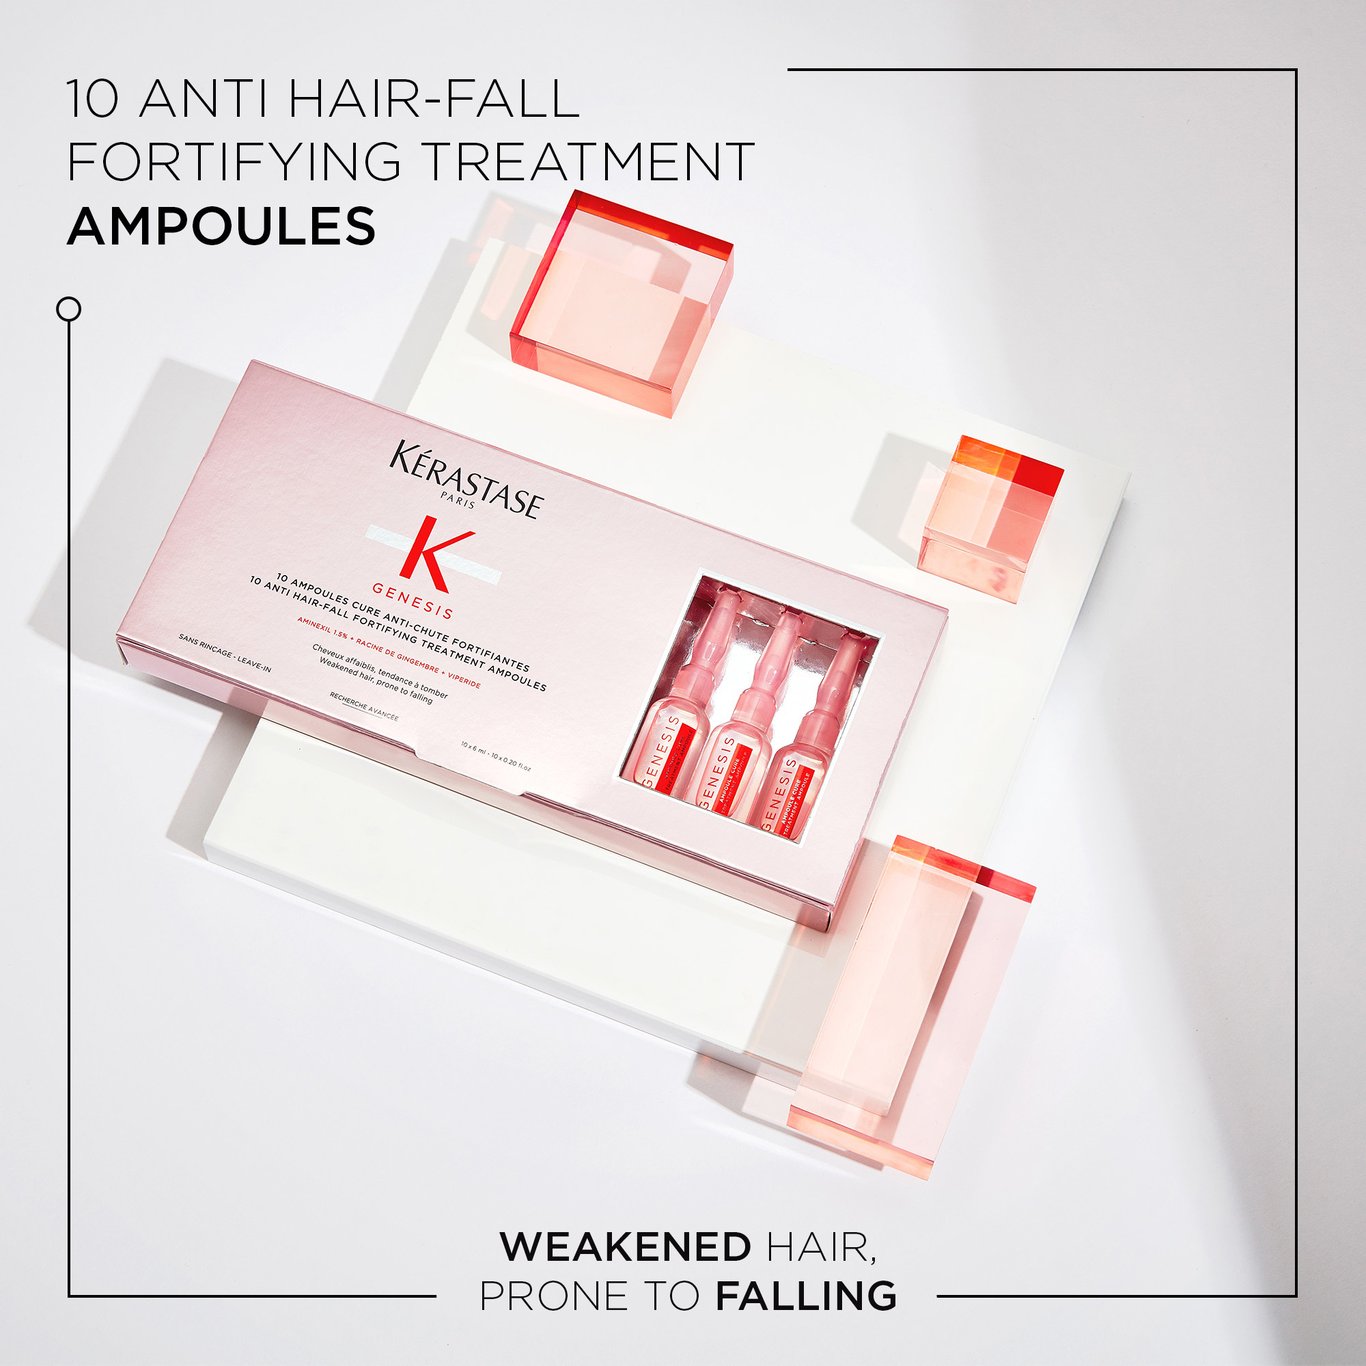 10 anti hair-fall fortifying treatment ampoules